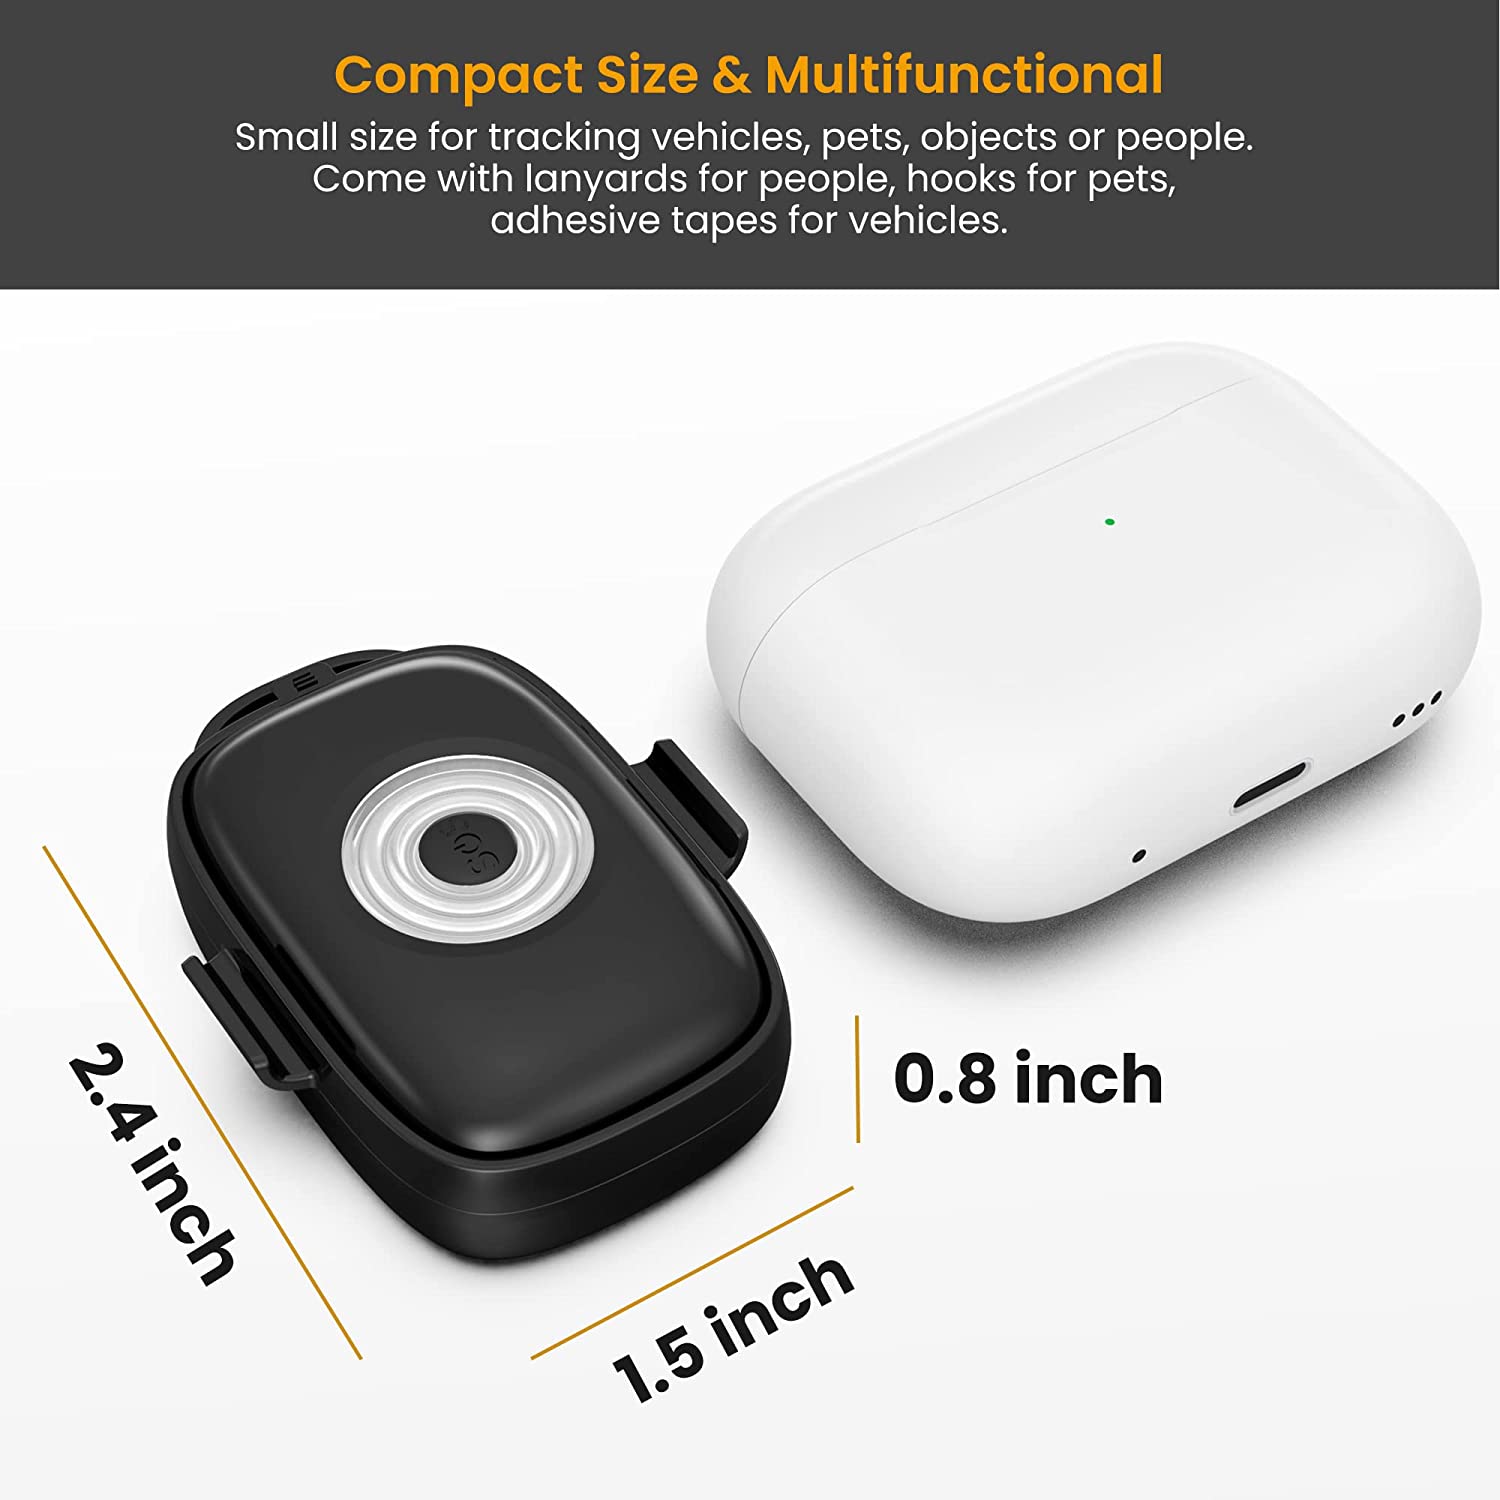 ABLEGRID GT-180C Small GPS Tracker for Vehicles Pets People 4G Real-time Tracking 1 Year Data Plan Included【 Prepaid Subscription Version】